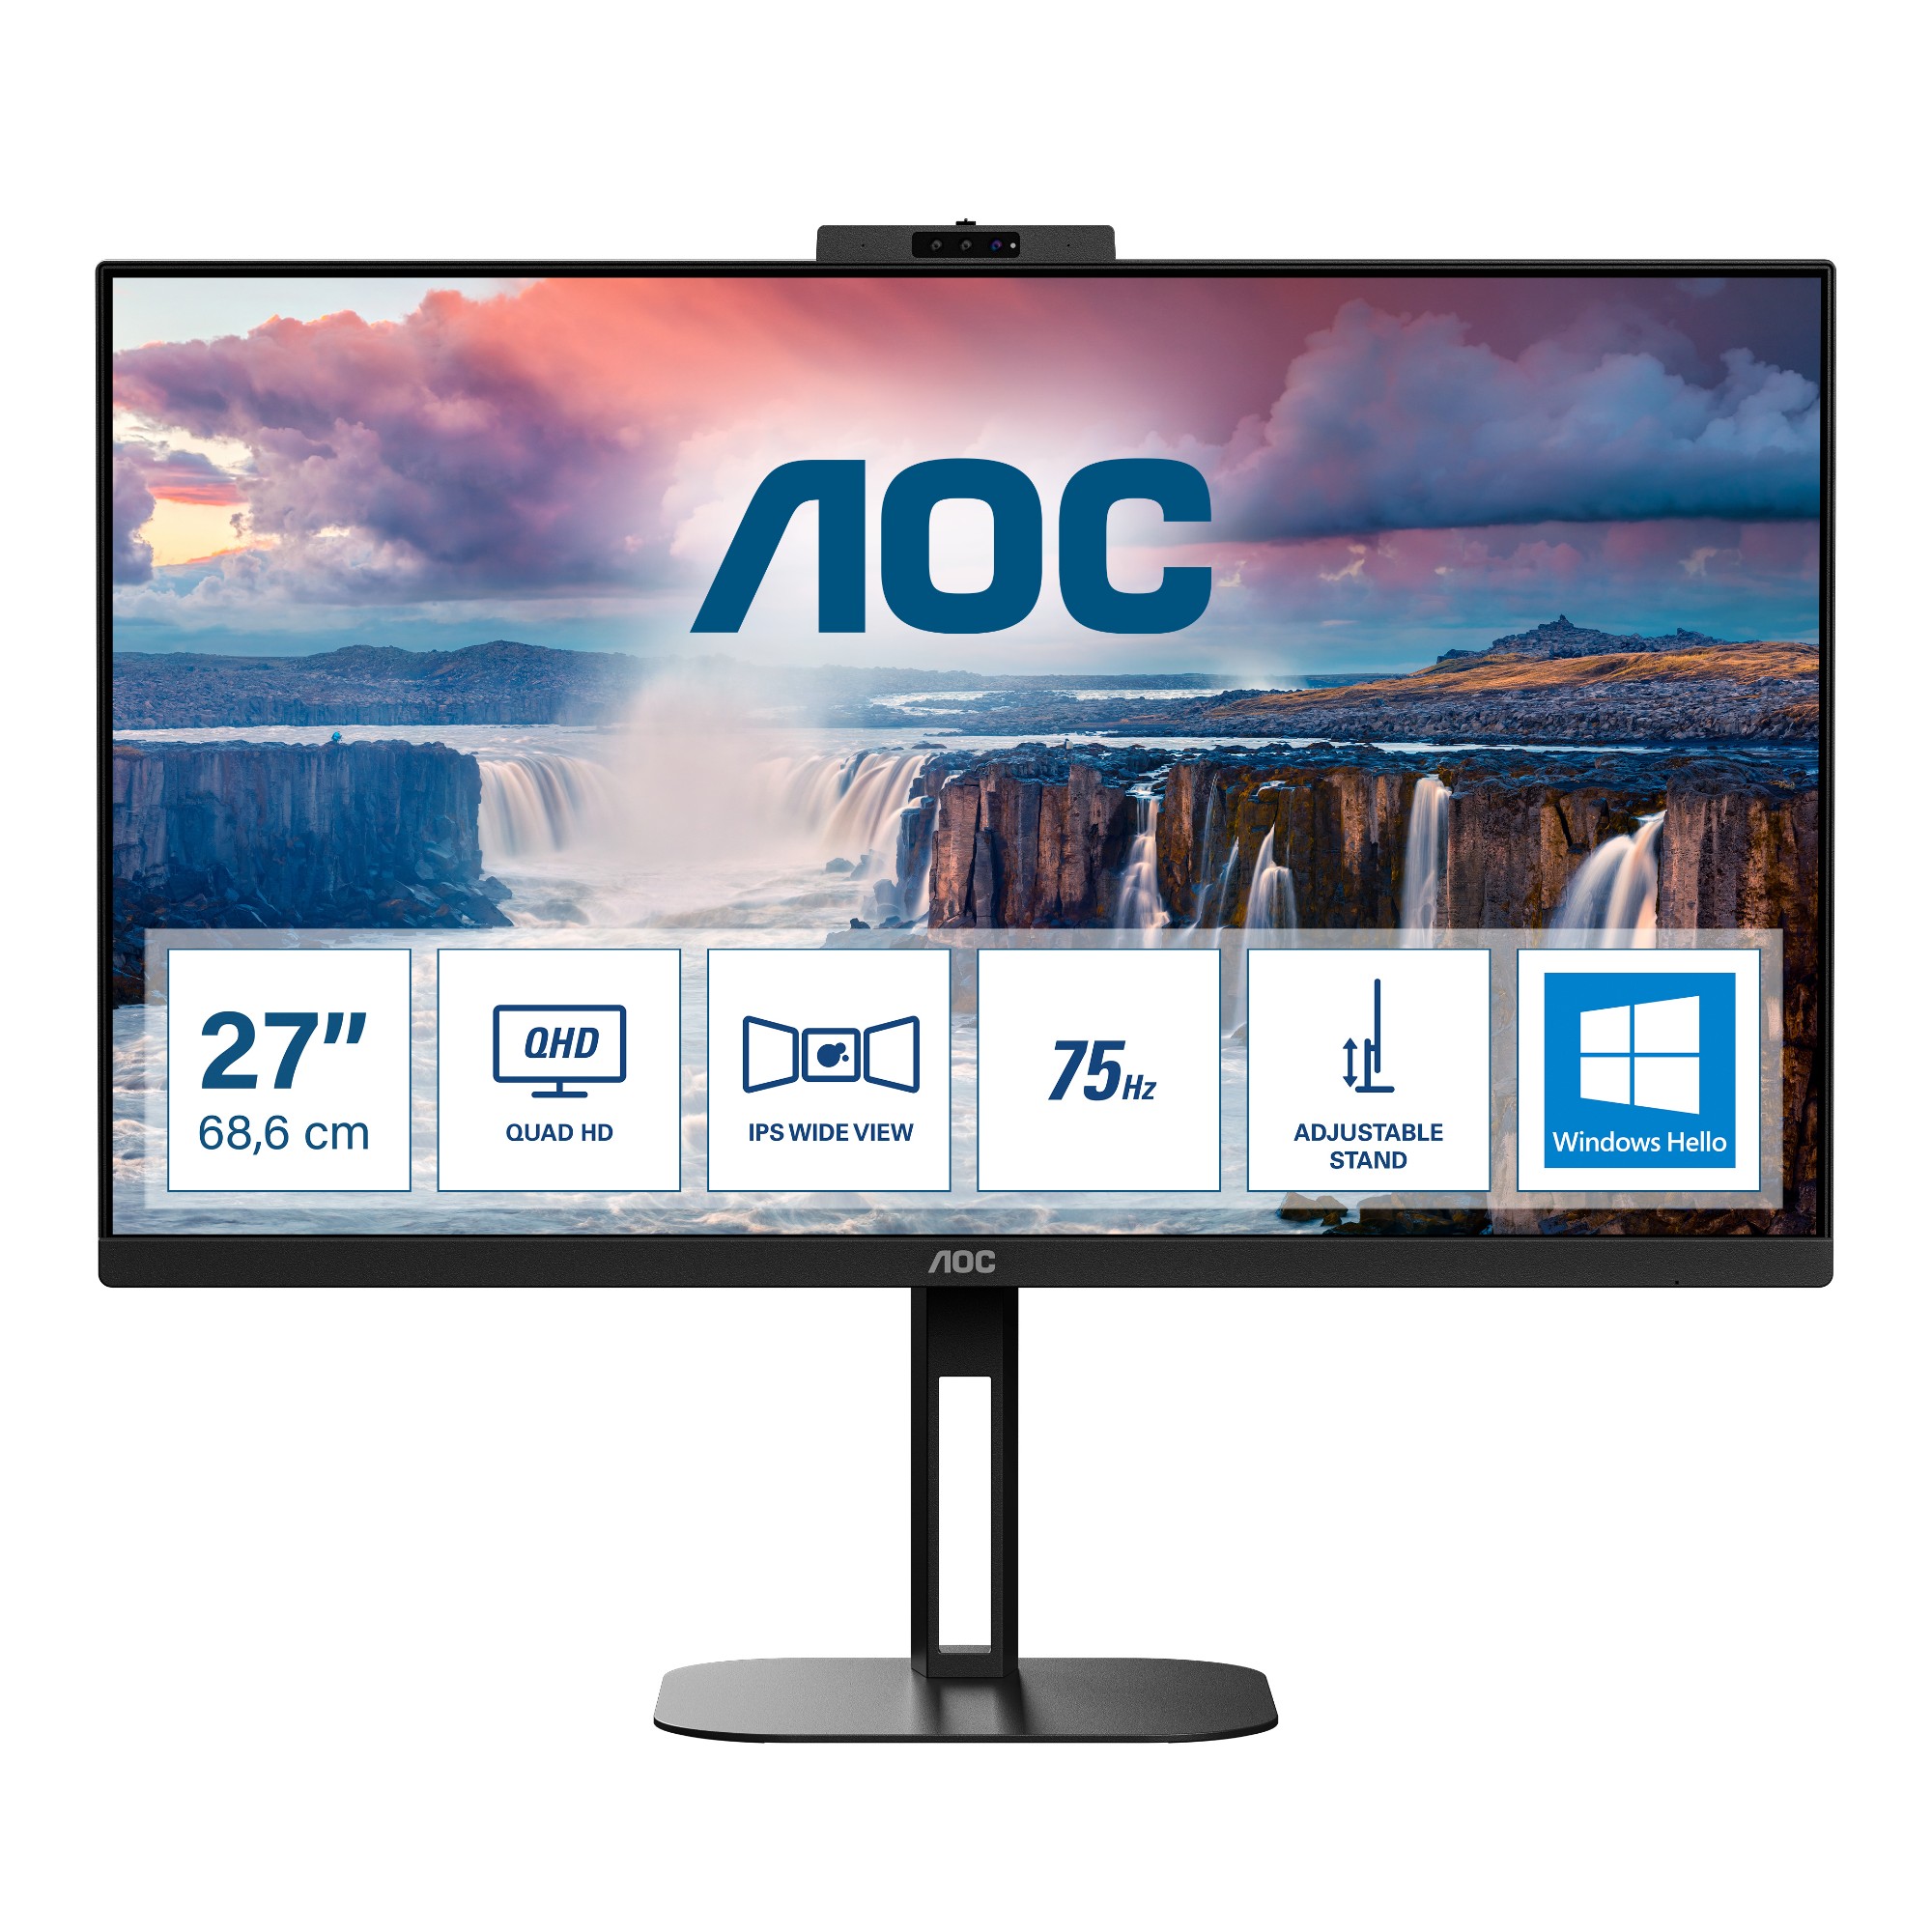 Screen size (inch) 27, Panel resolution 2560x1440, Refresh rate 75 Hz, Response time MPRT 1 ms, Panel type IPS, USB-C connectivity USB-C 3.2 x 1 (DP alt mode, upstream, power delivery up to 65 W), HDMI HDMI 2.0 x 1, Display Port DisplayPort 1.4 x 1, D-SUB